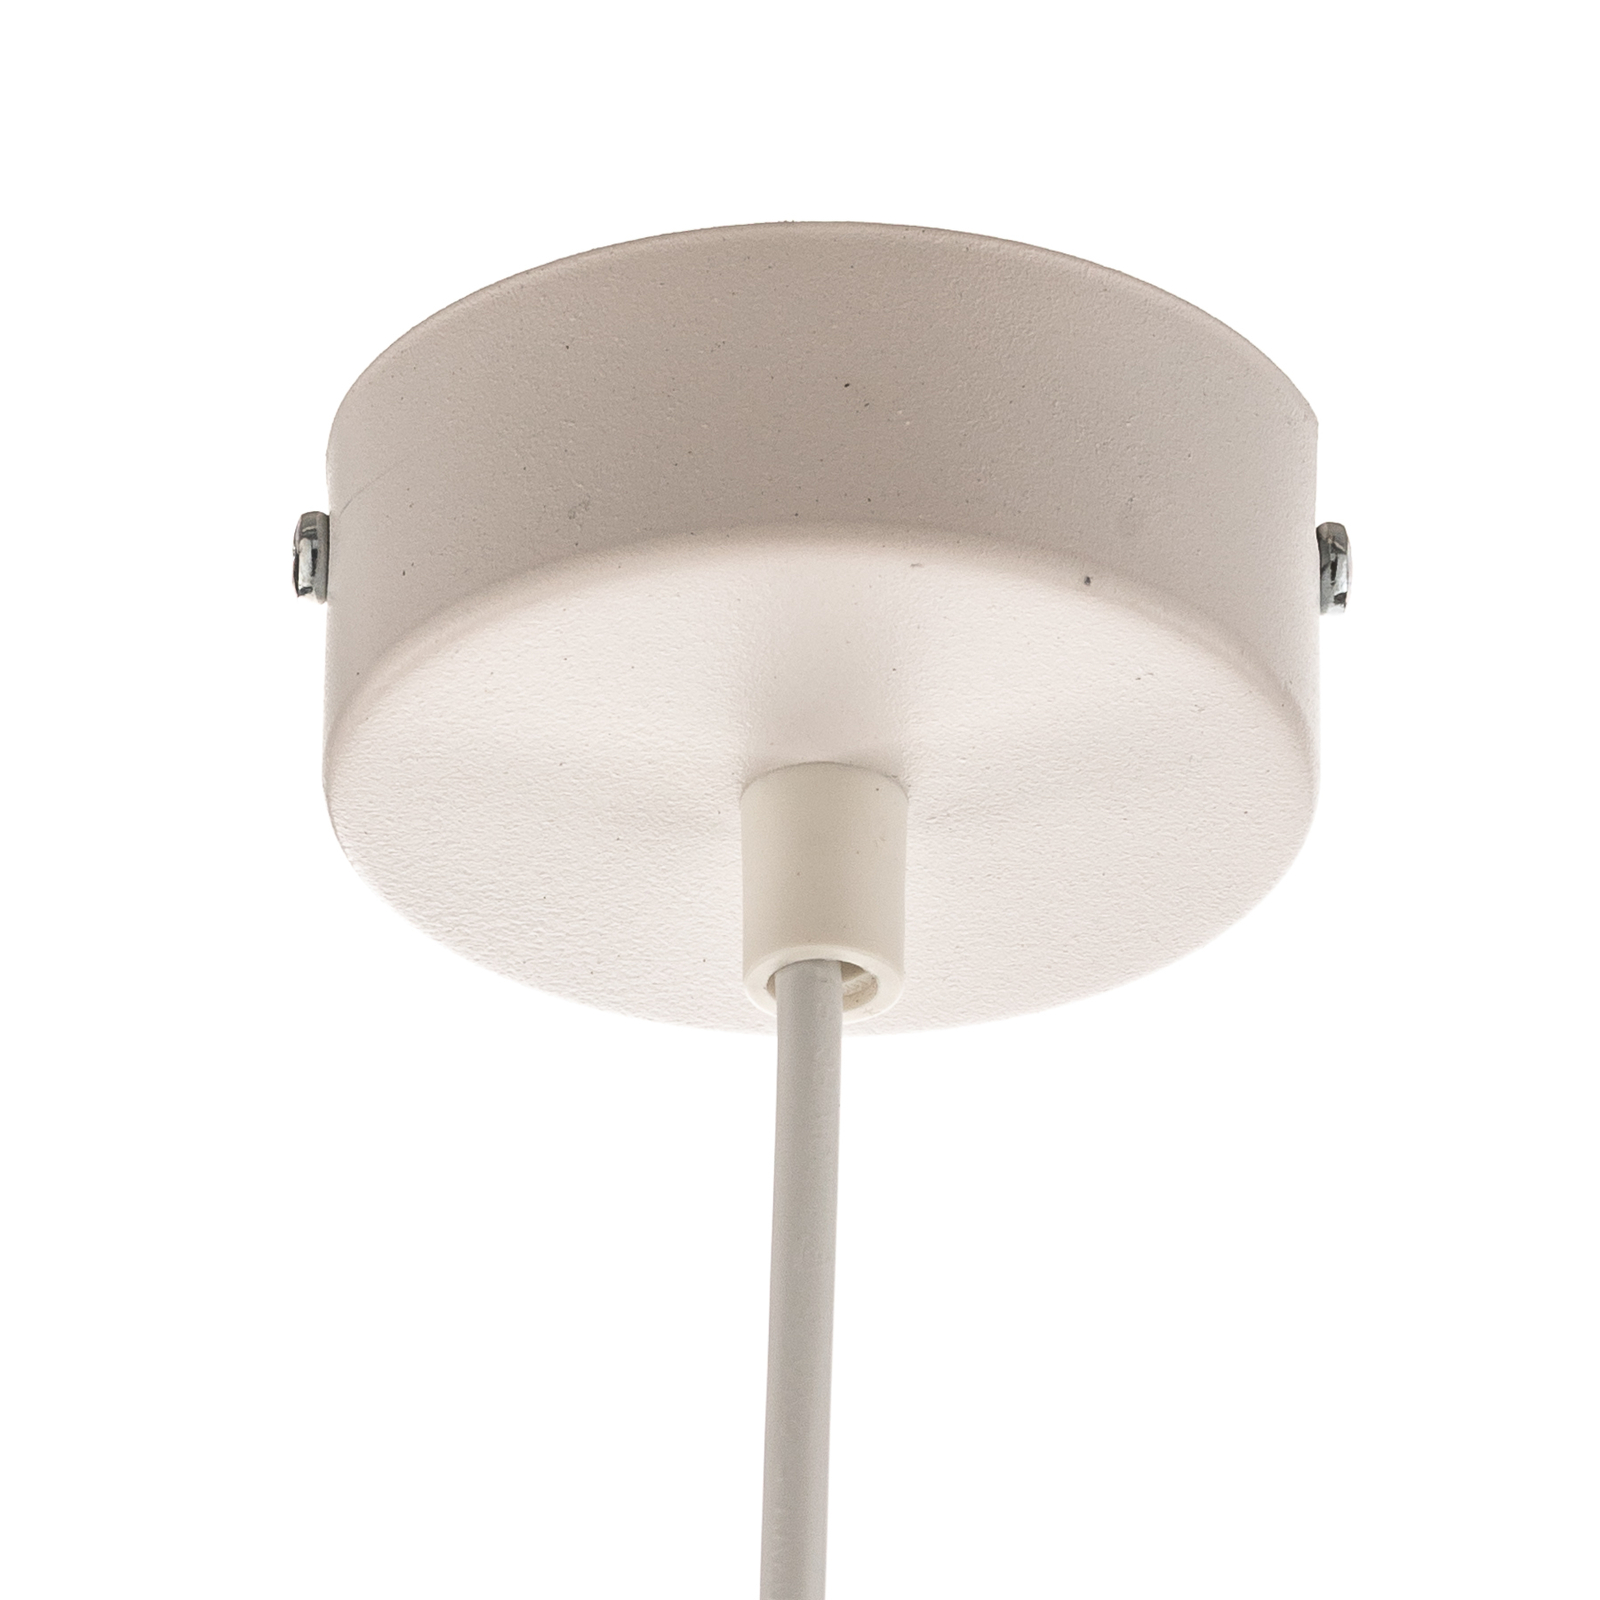 Hanglamp Pure, 2-lamps, wit